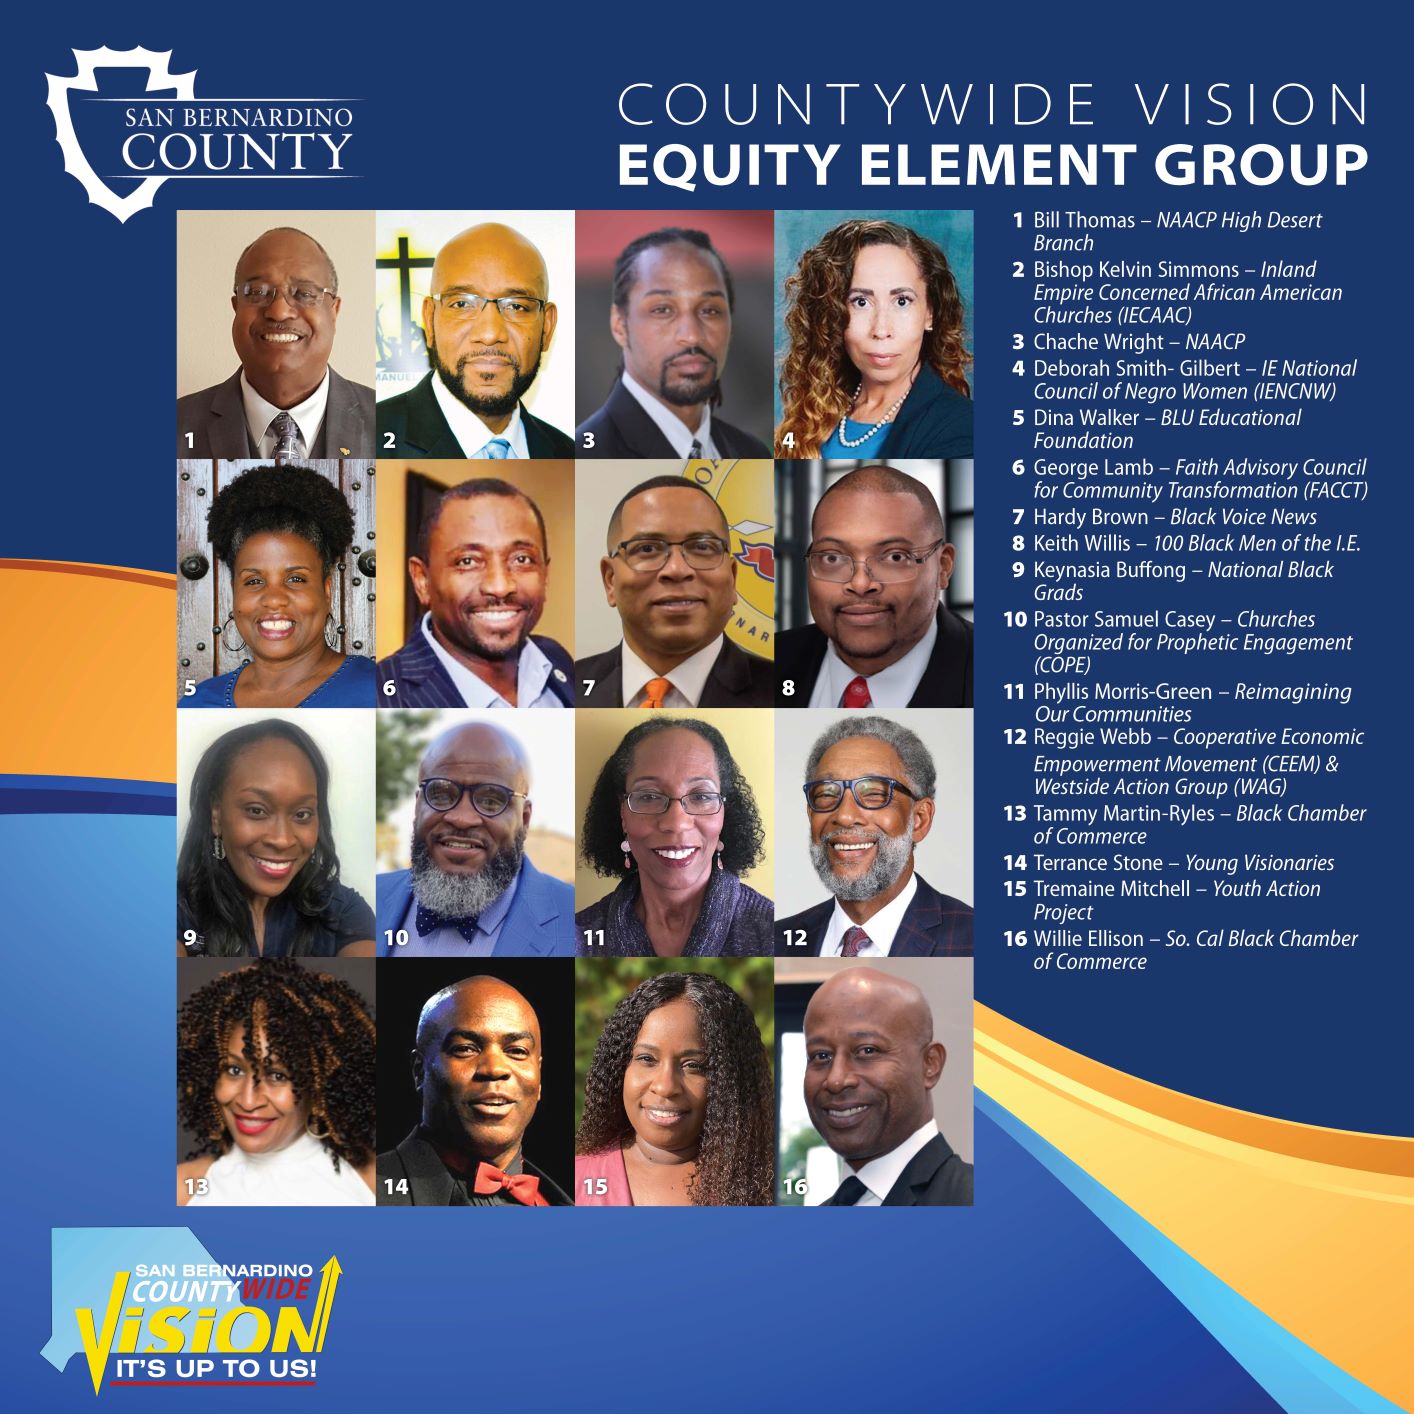 Countywide Equity Element Group Members